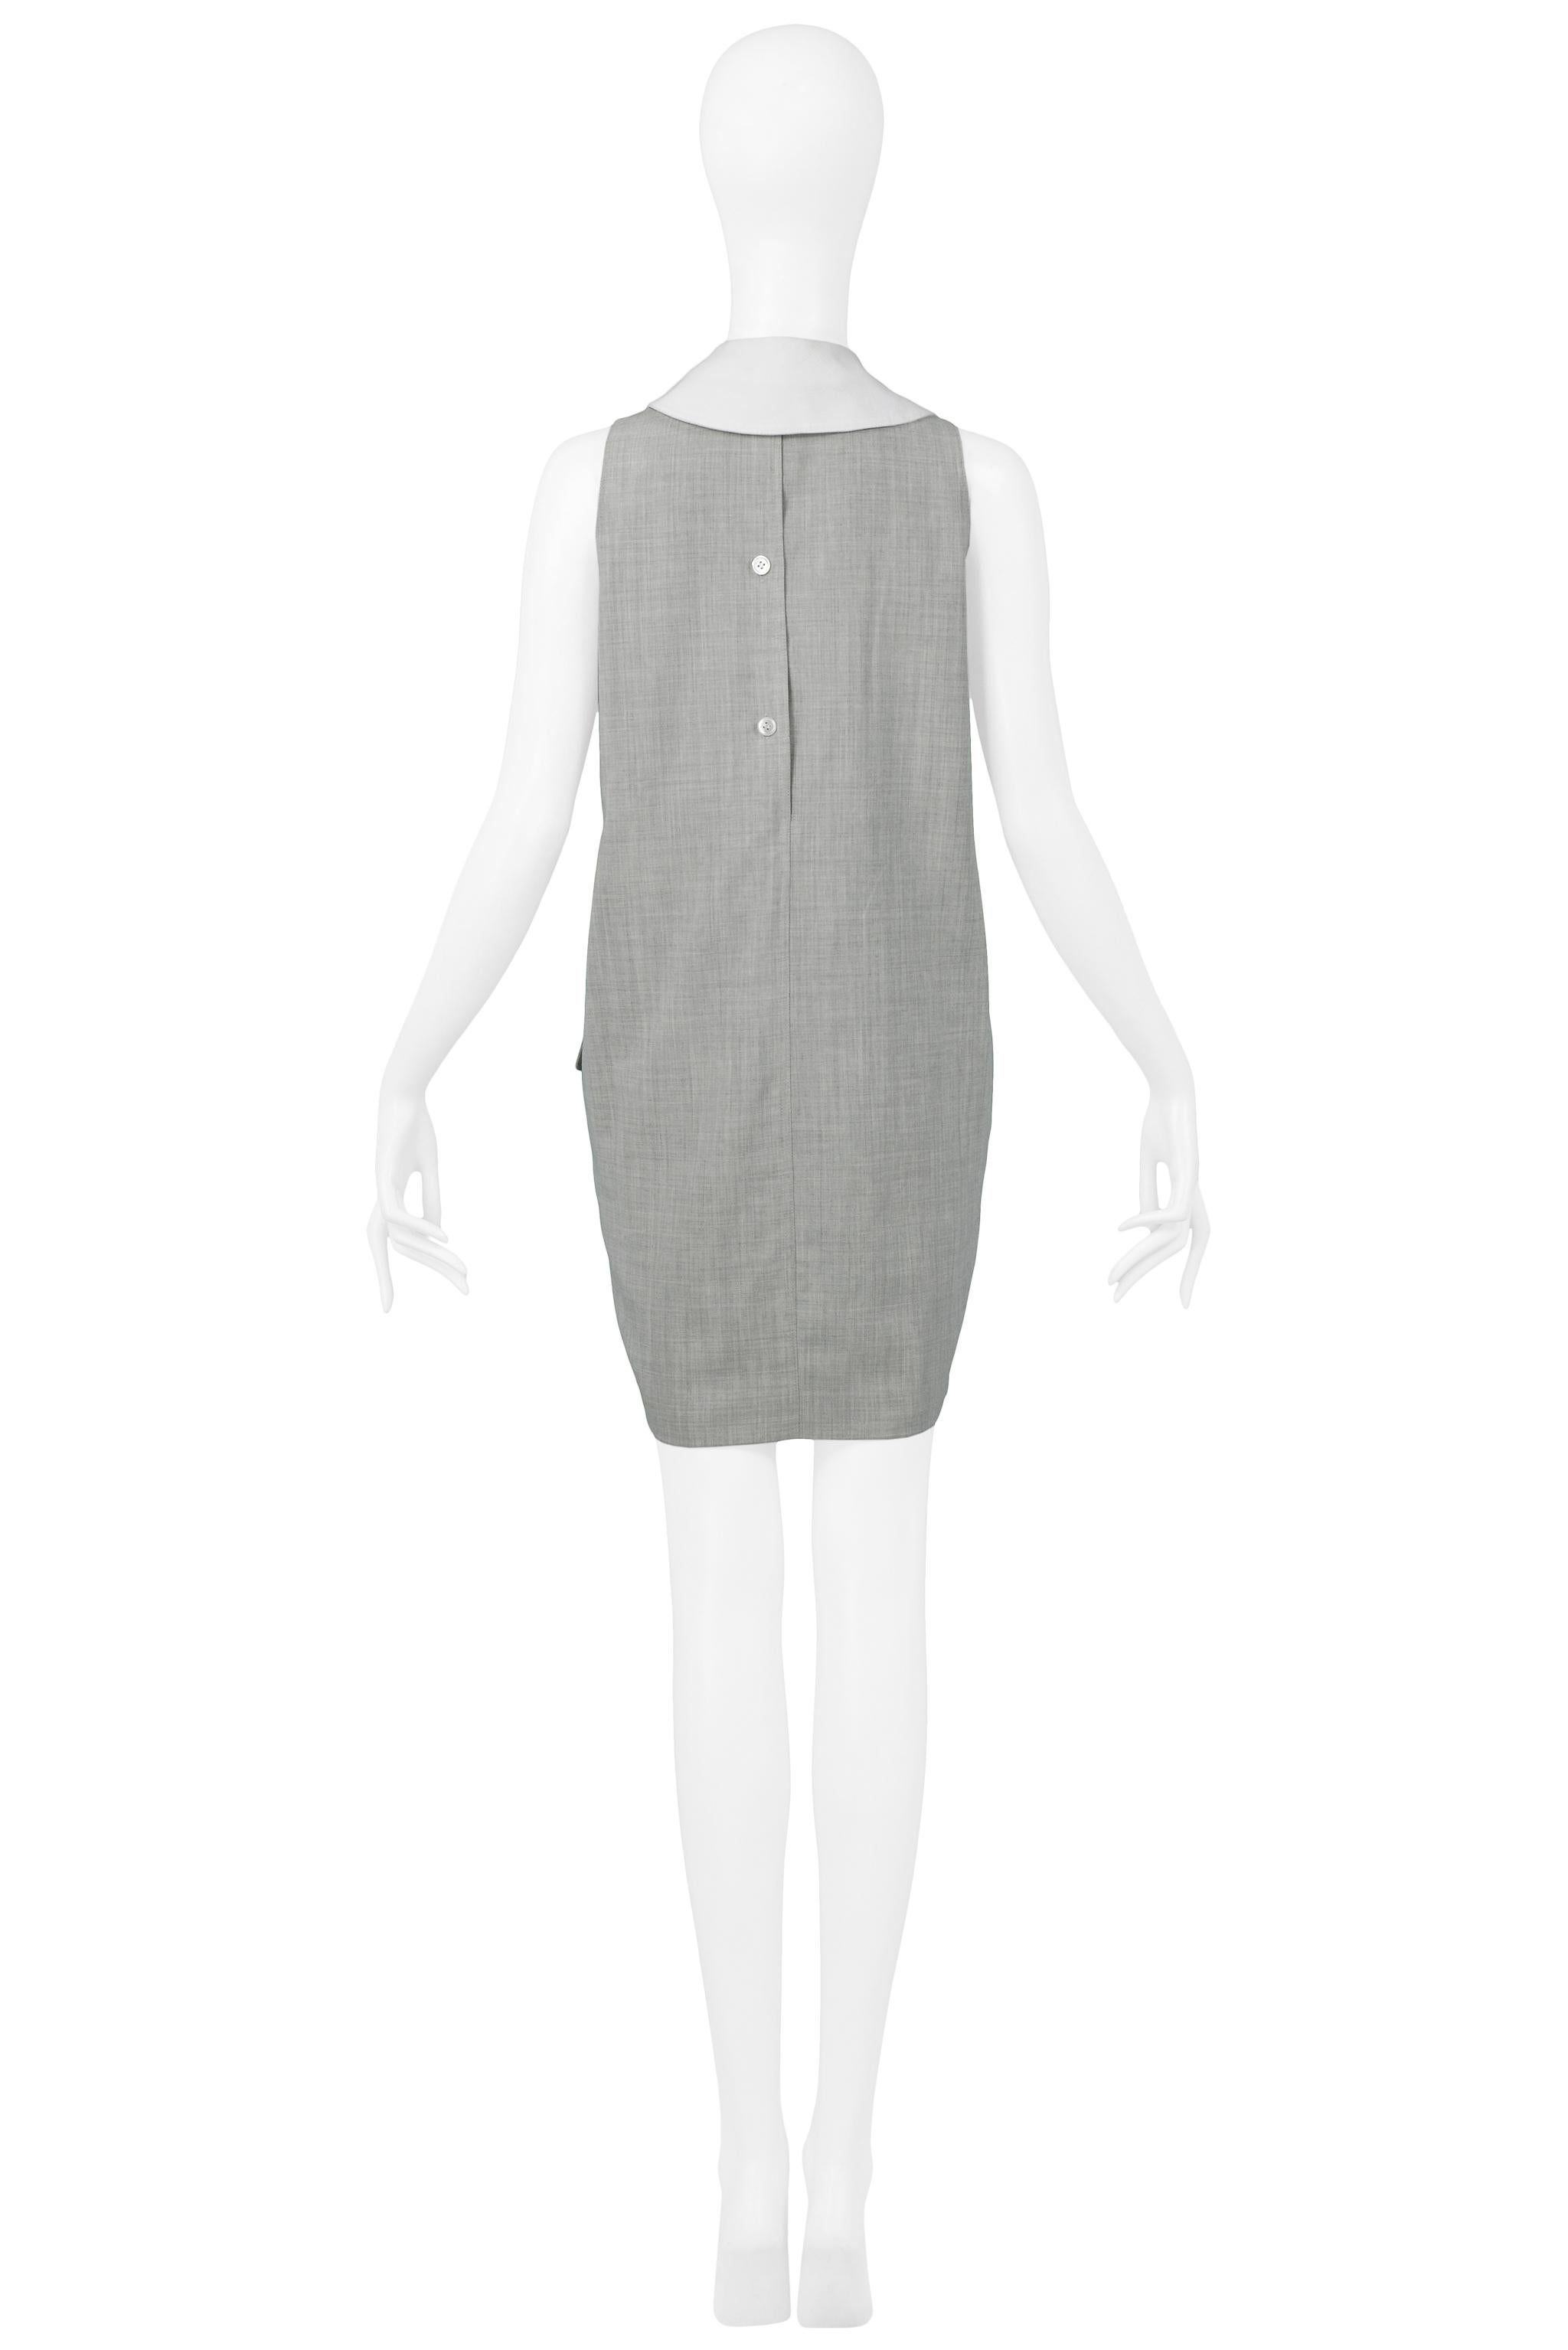 Gray Issac Mizrahi Grey Dress With Pink Bow 1991 For Sale